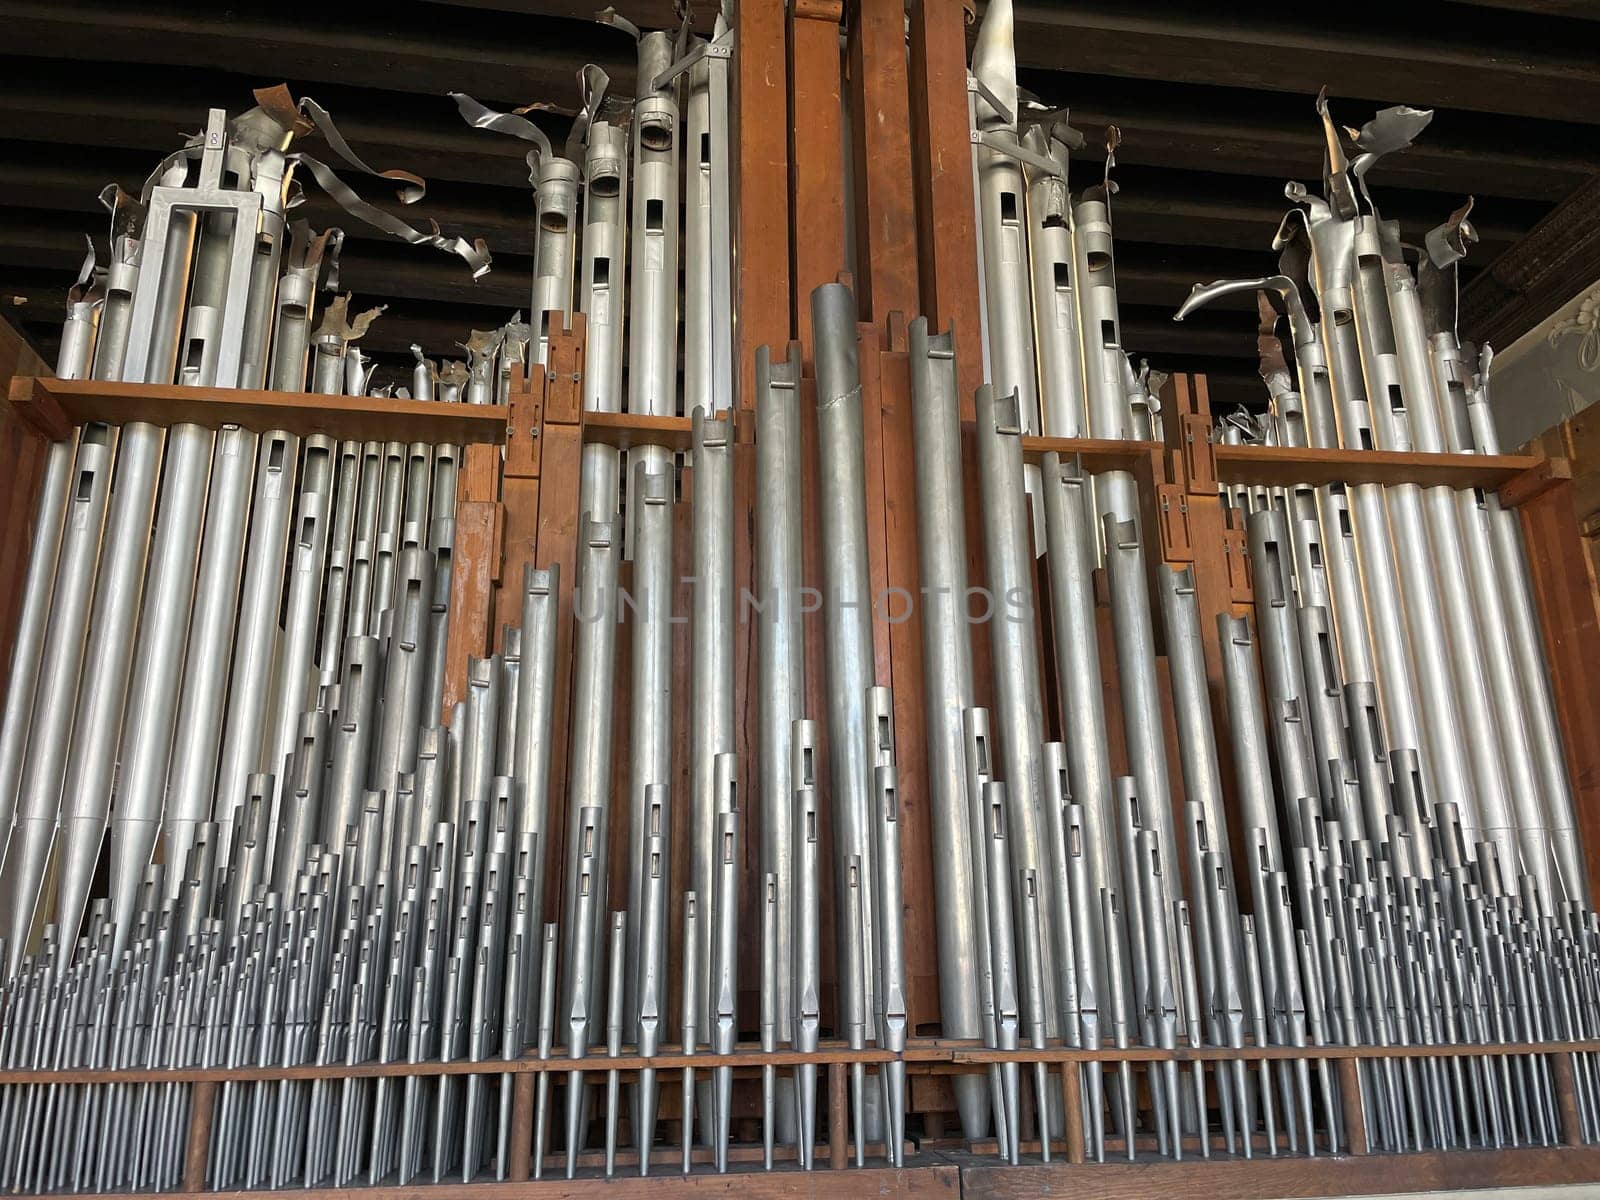 The organ is the largest brass keyboard musical instrument, consisting of a set of pipes into which air is pumped. High quality photo